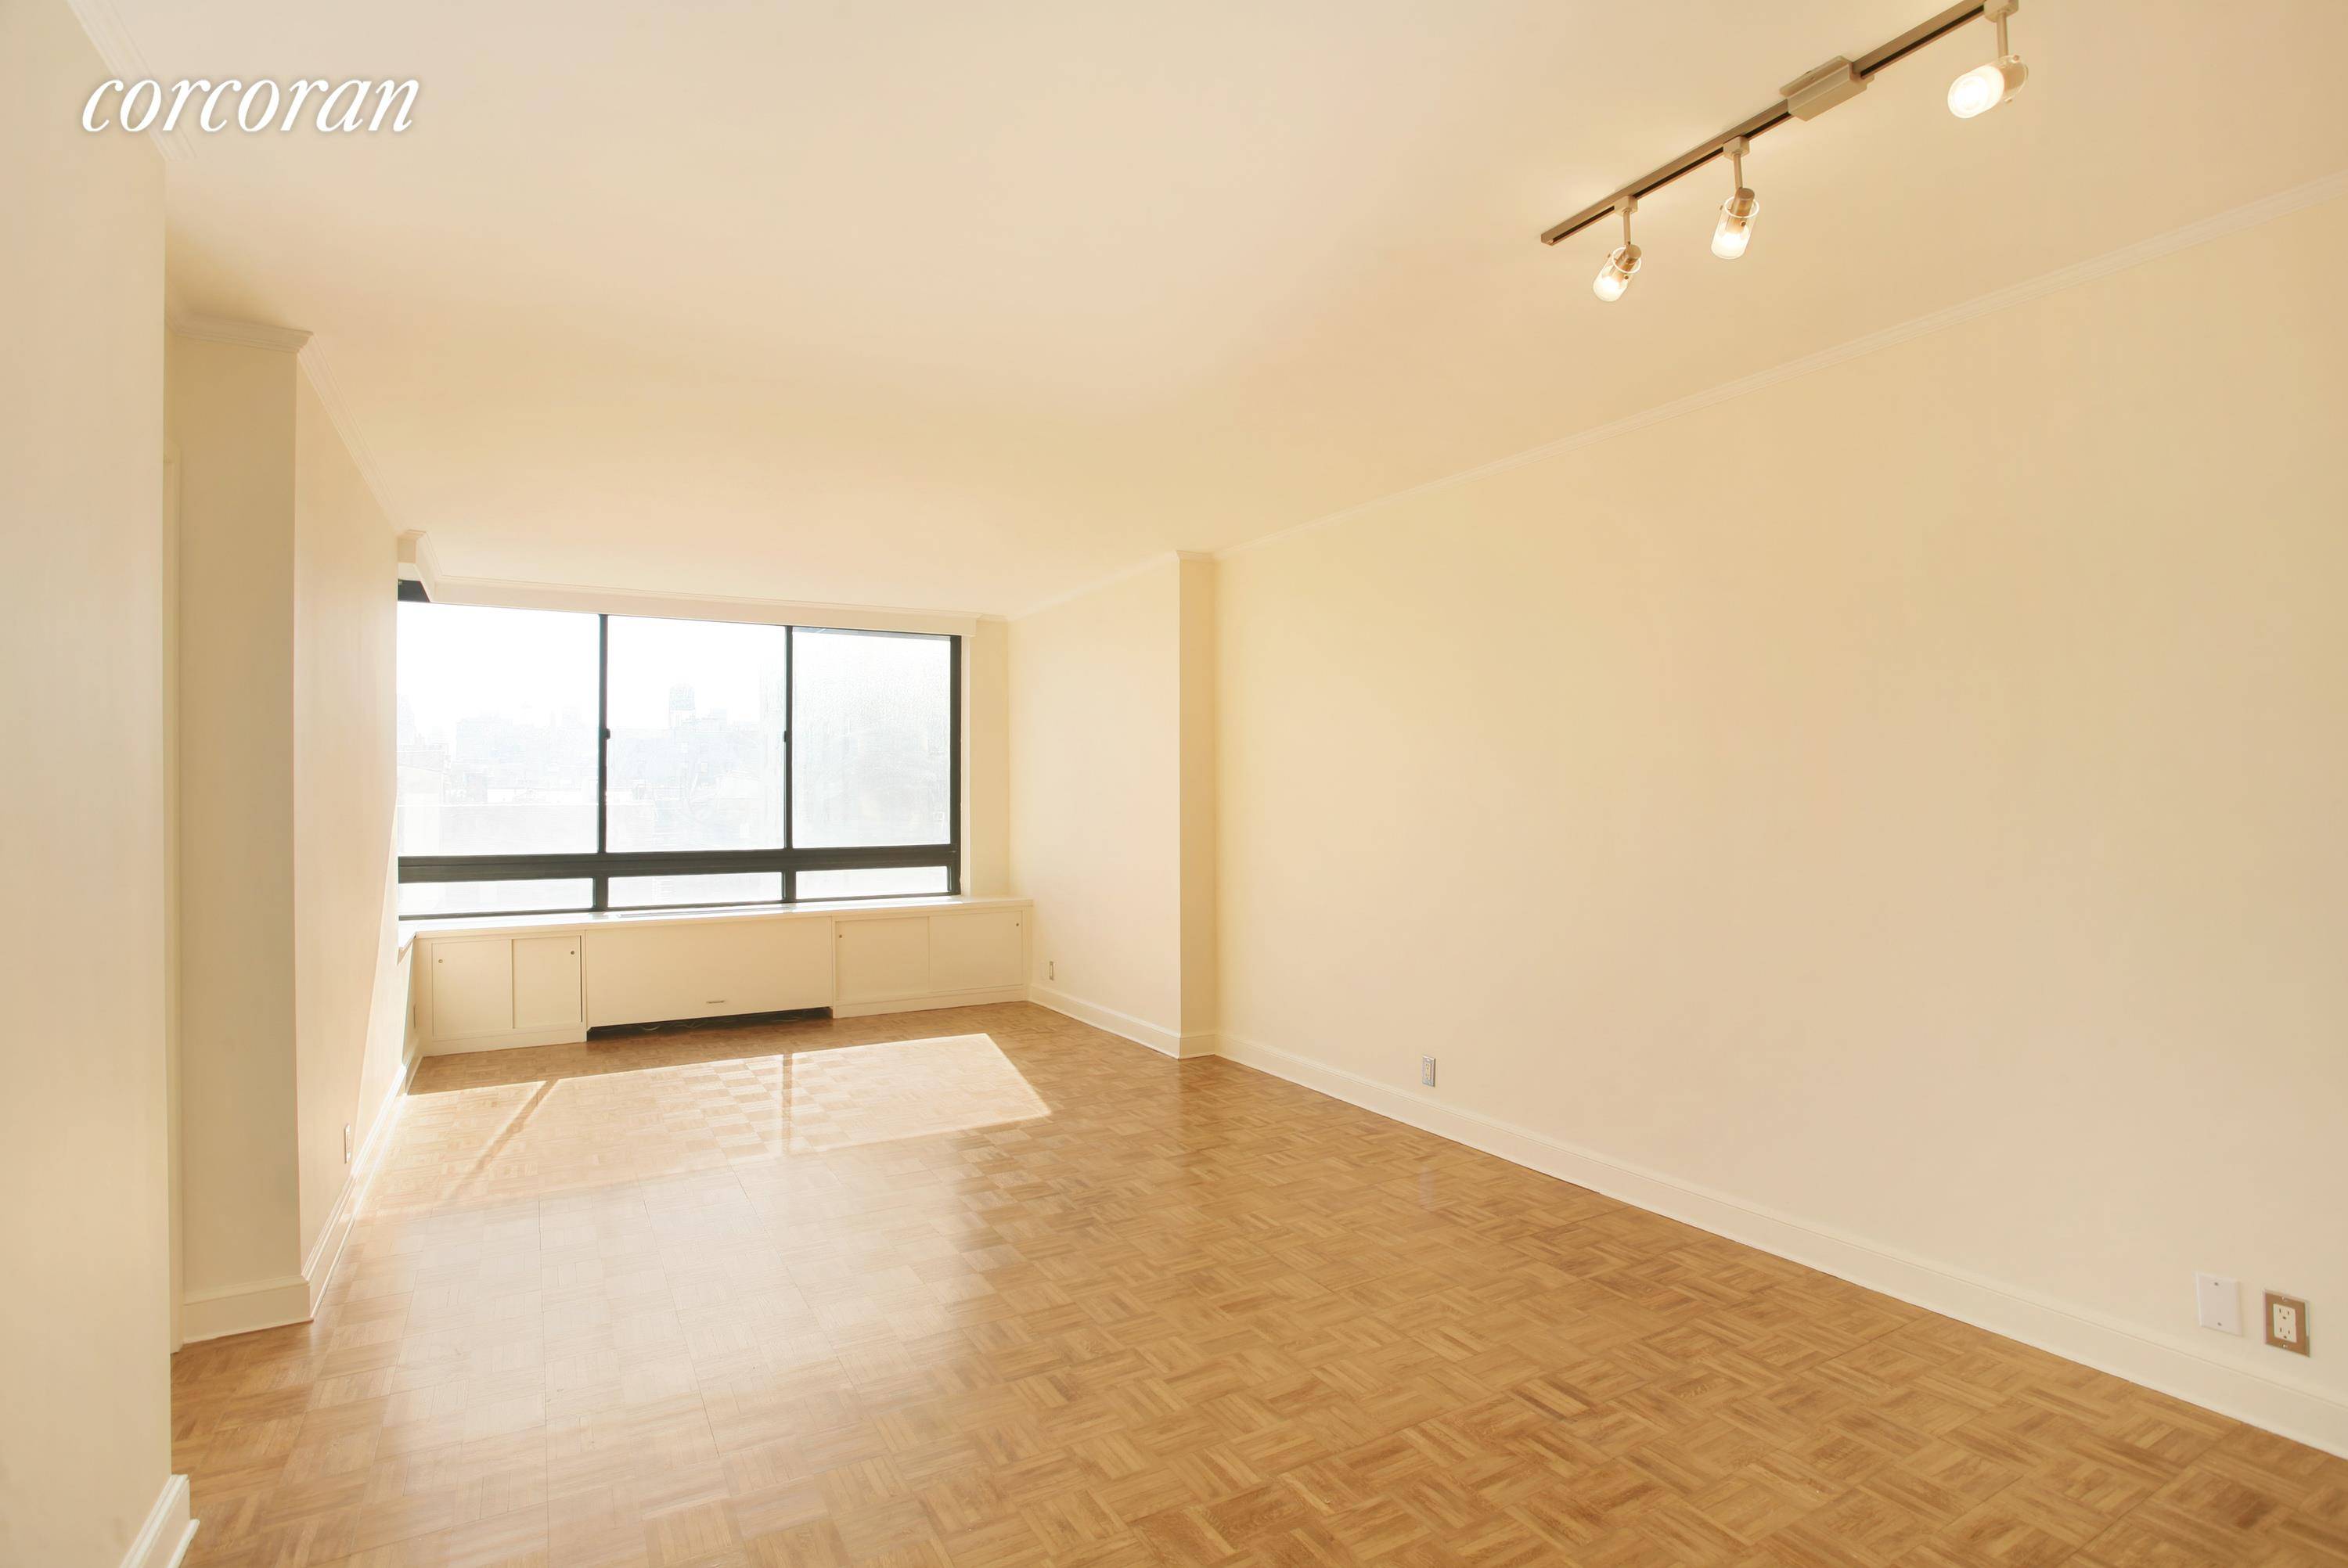 Live at the Bromley ! Full service condominium in the heart of the Upper Westside.